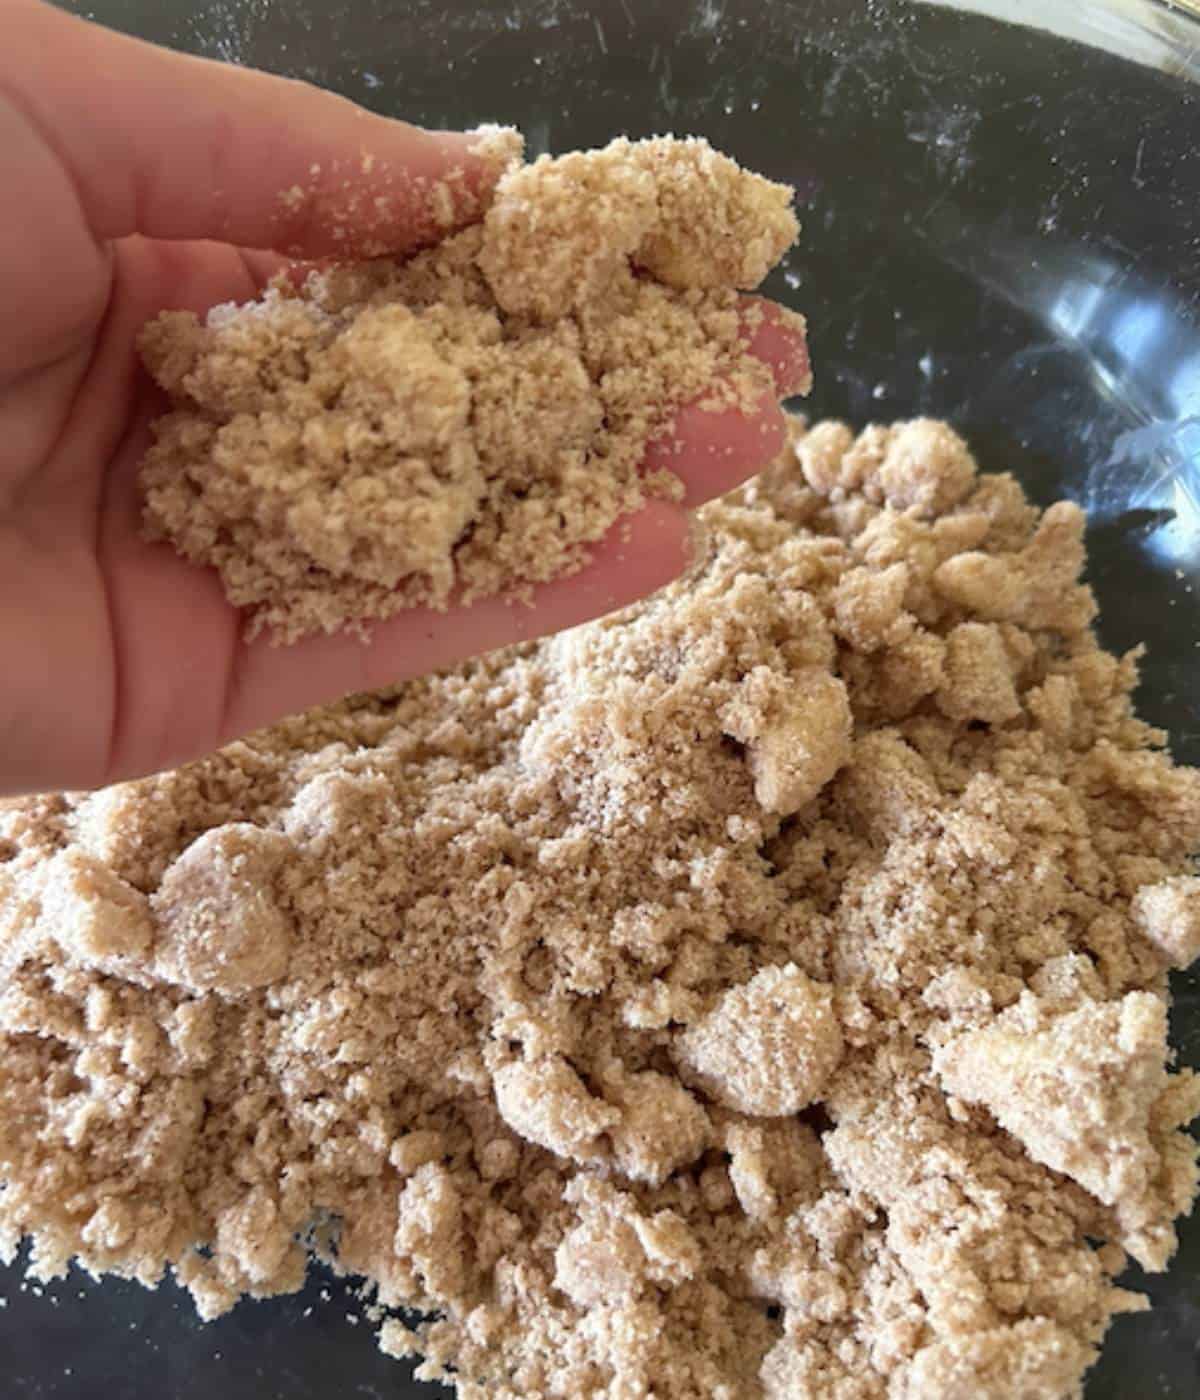 Hand showing texture of the crumble topping.